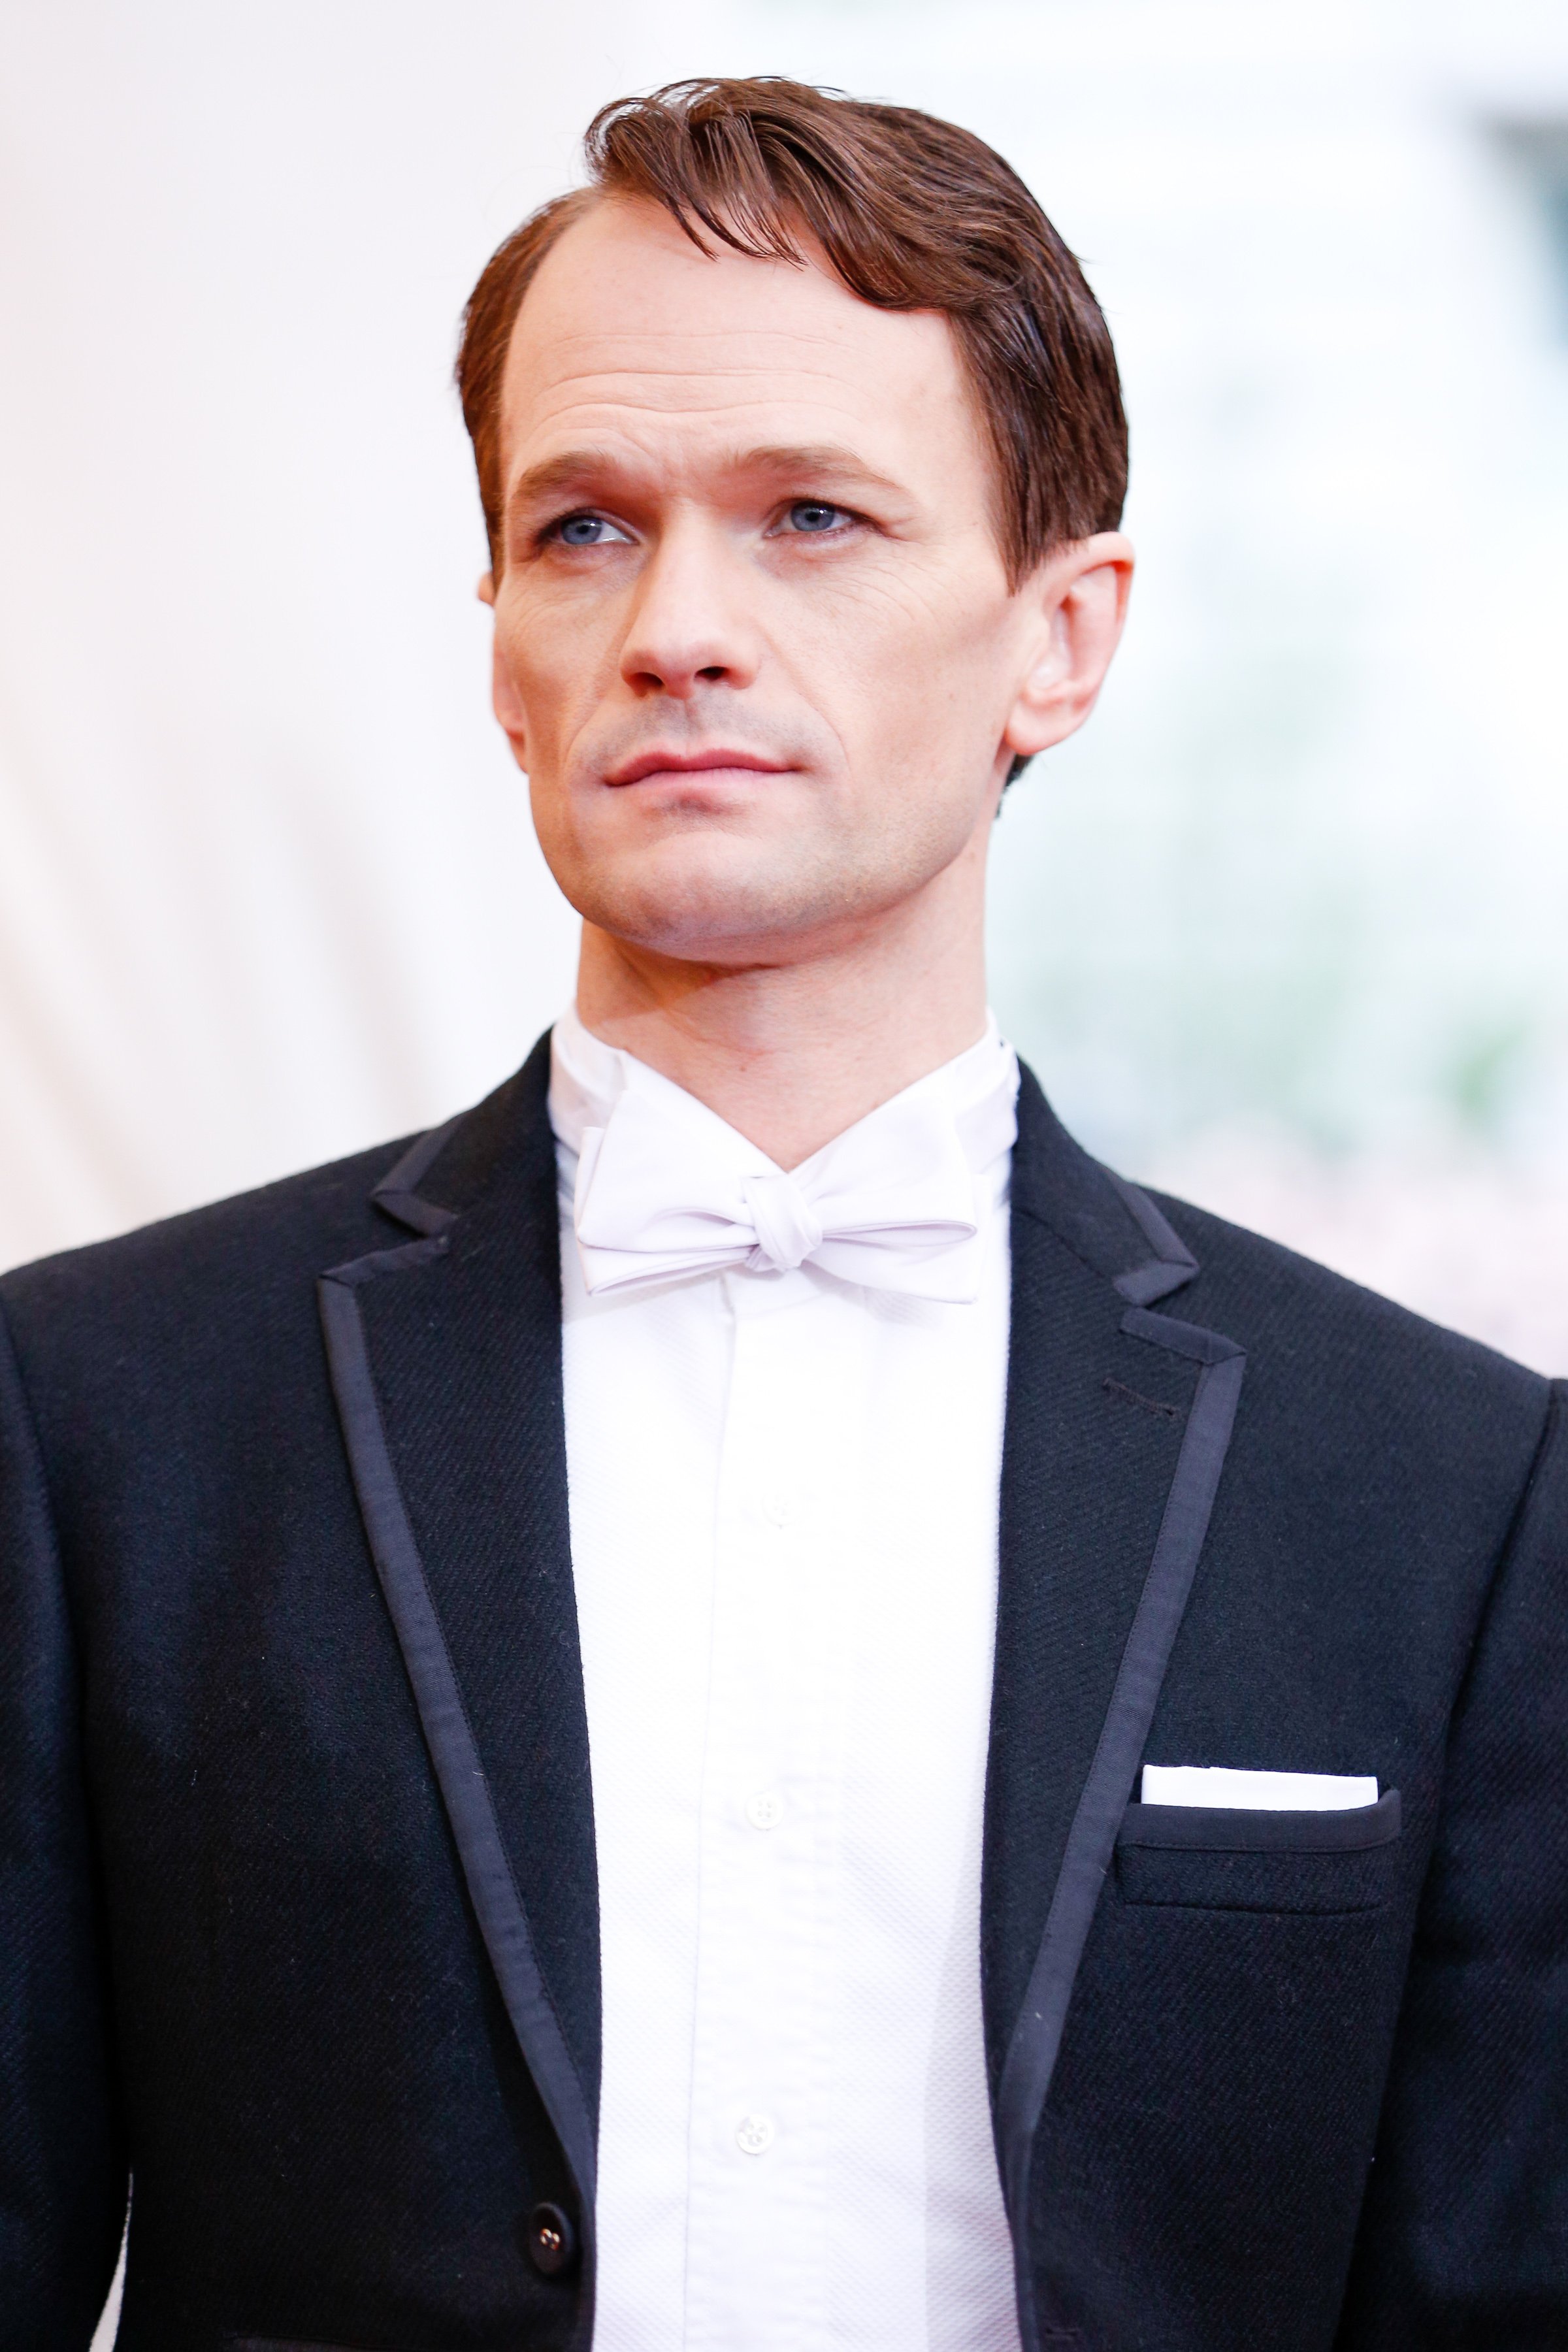 Neil Patrick Harris attends The Metropolitan Museum of Art's Costume Institute Benefit on May 2, 2014 in New York City. (Julian Mackler—BFAnyc/SIPA USA)